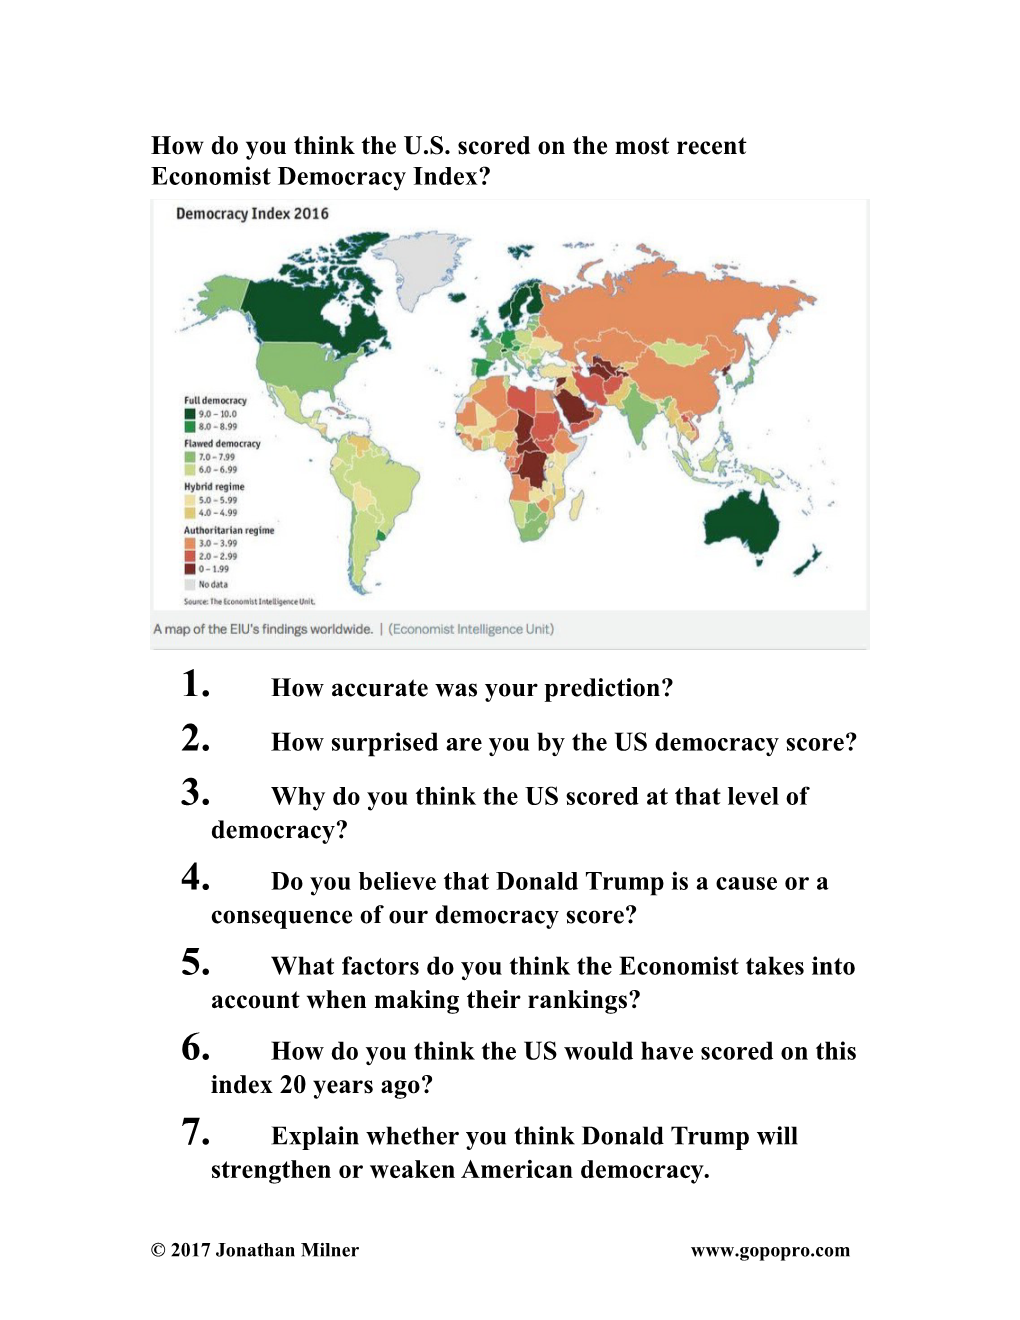 How Do You Think the U.S. Scored on the Most Recent Economist Democracy Index?